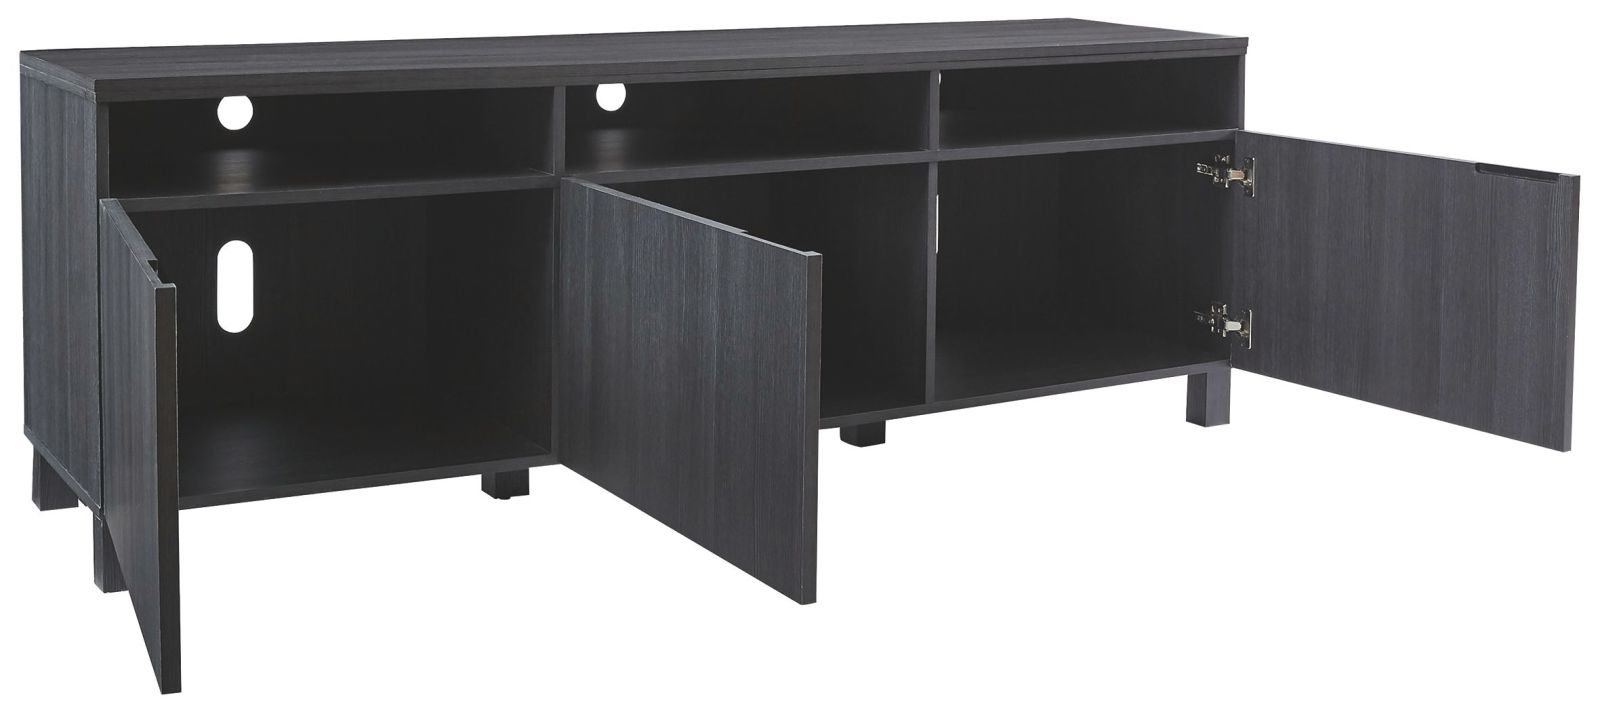 Yarlow – Black – Extra Large TV Stand W215-66